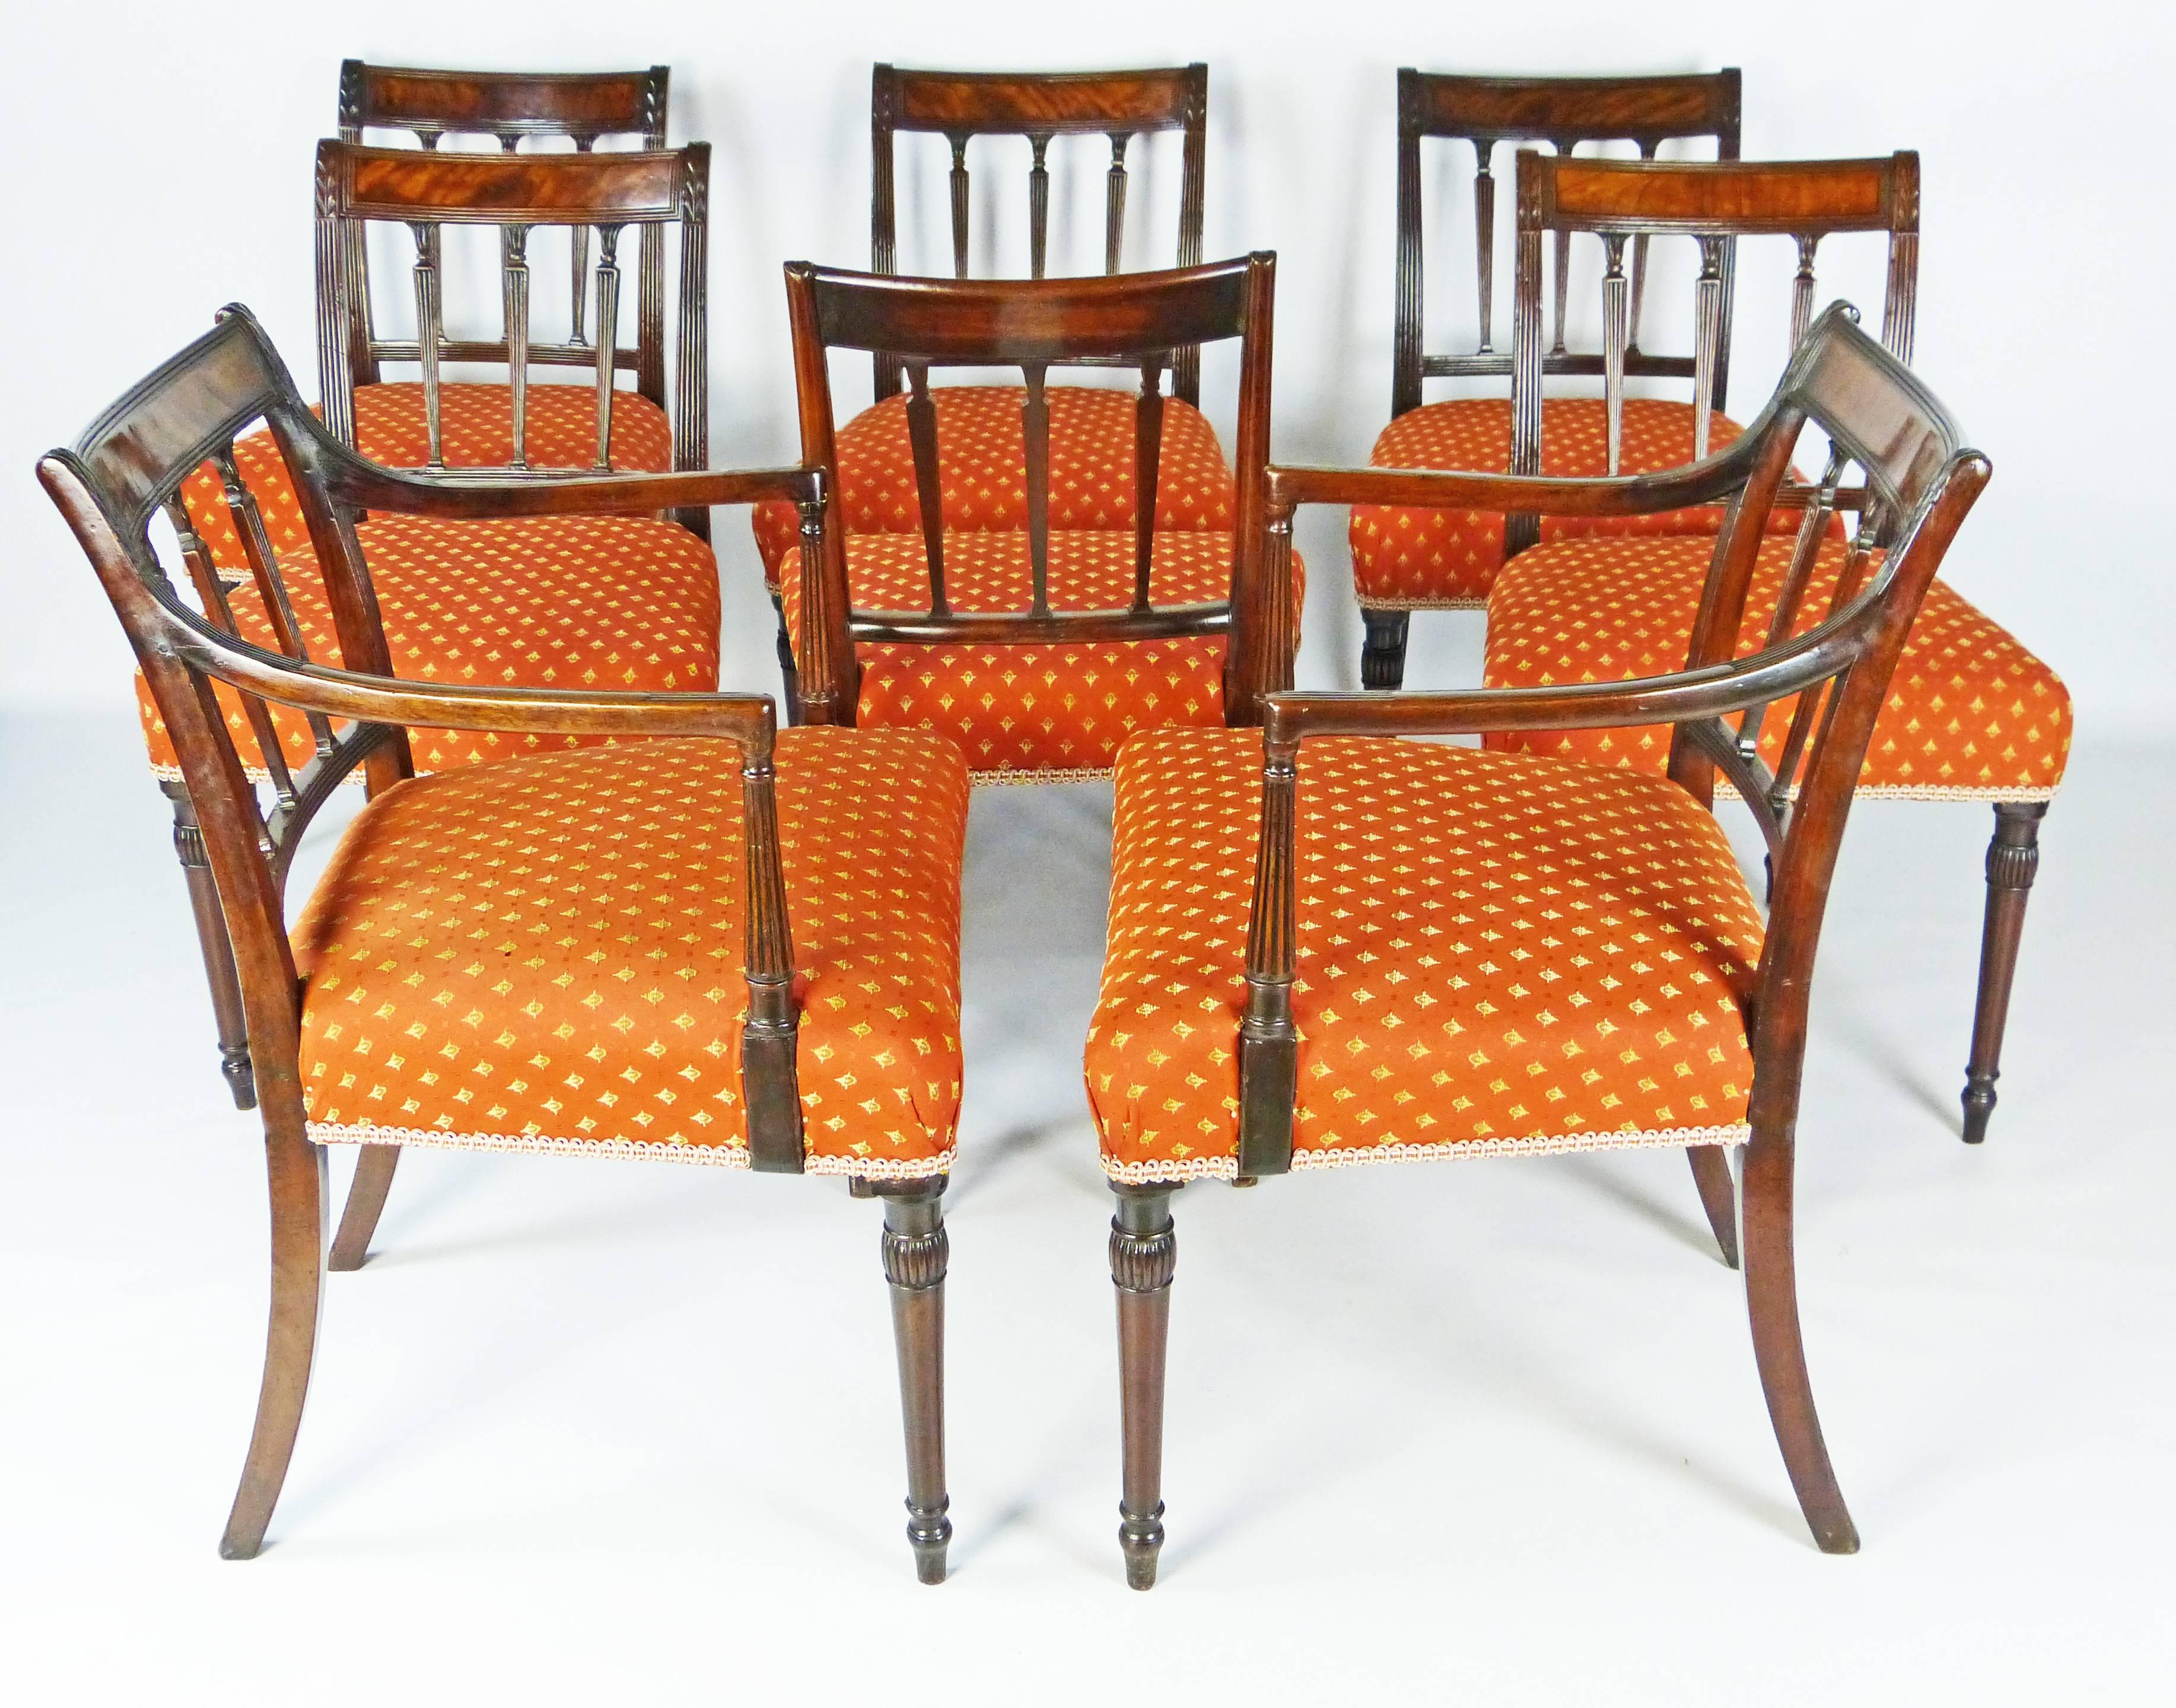 Outstanding set of 8 Cuban mahogany dining chairs from the George III period and of Sheraton design. The set is composed of six chairs and two armchairs of elegant lines all in exceptional original condition, possibly never having needed restoration